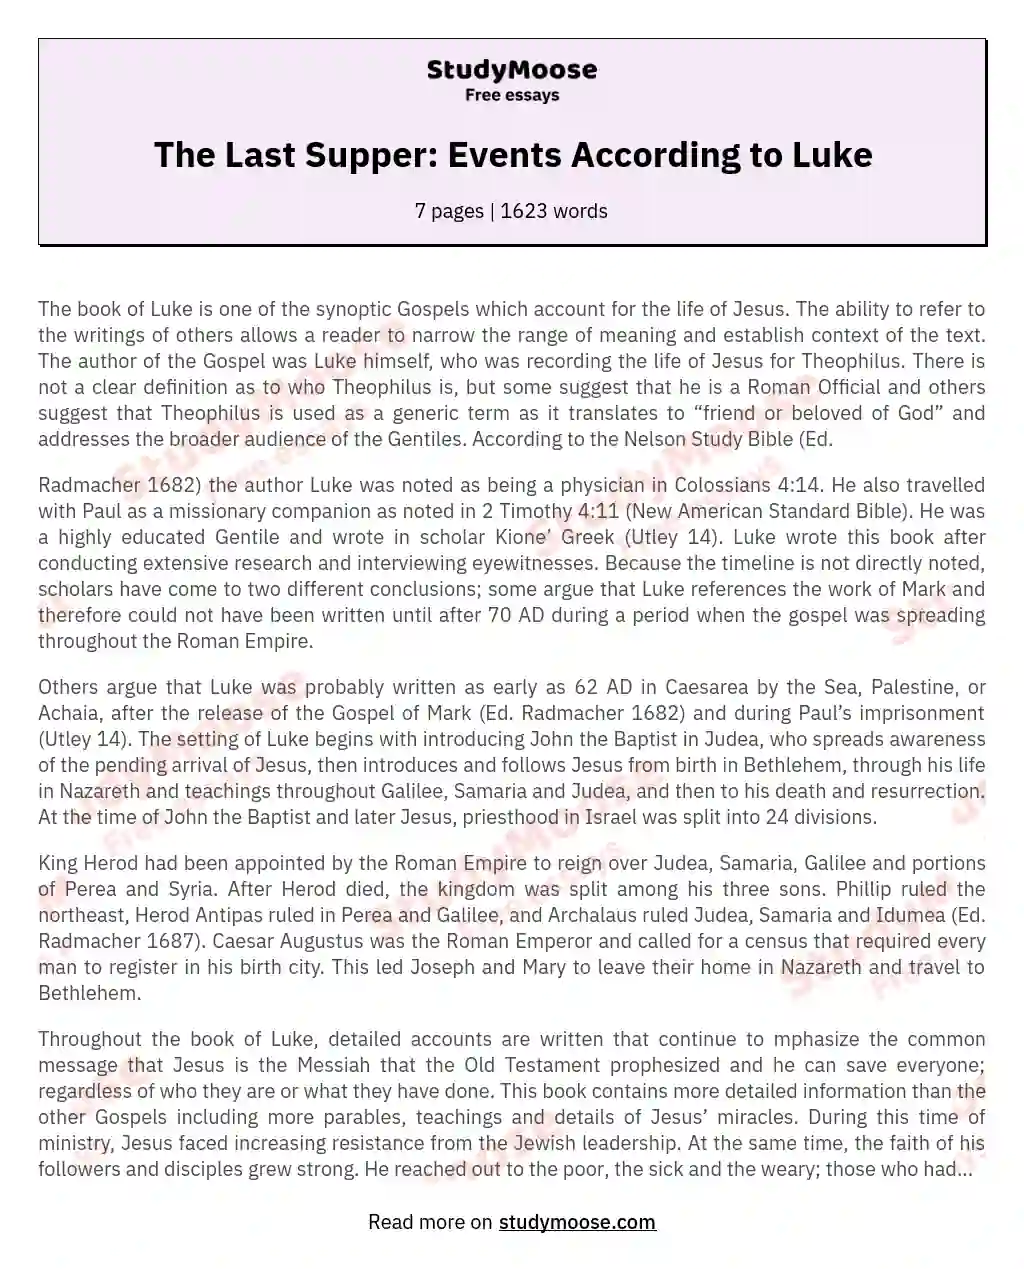 The Last Supper: Events According to Luke